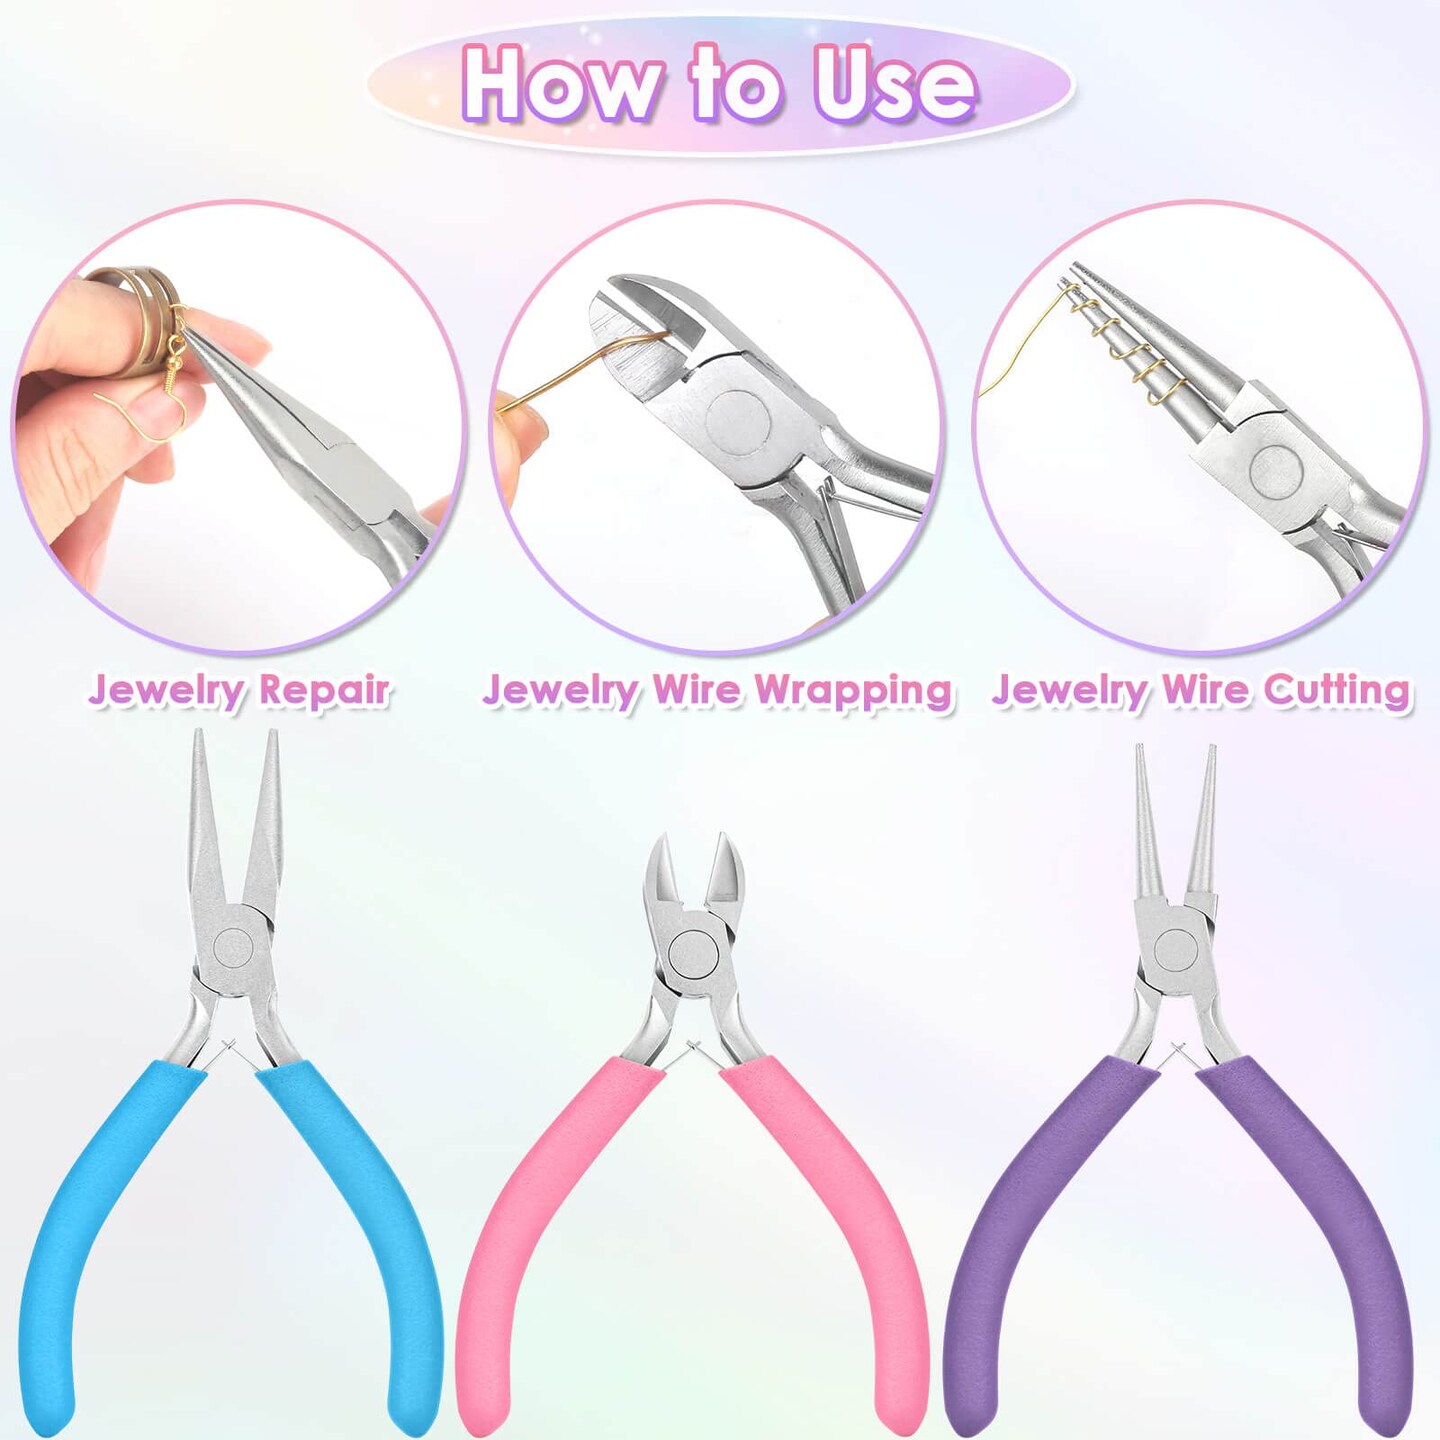 Jewelry Pliers, Shynek 3pcs Jewelry Making Pliers Tools with Needle Nose Pliers/Chain Nose Pliers, Round Nose Pliers and Wire Cutter for Jewelry